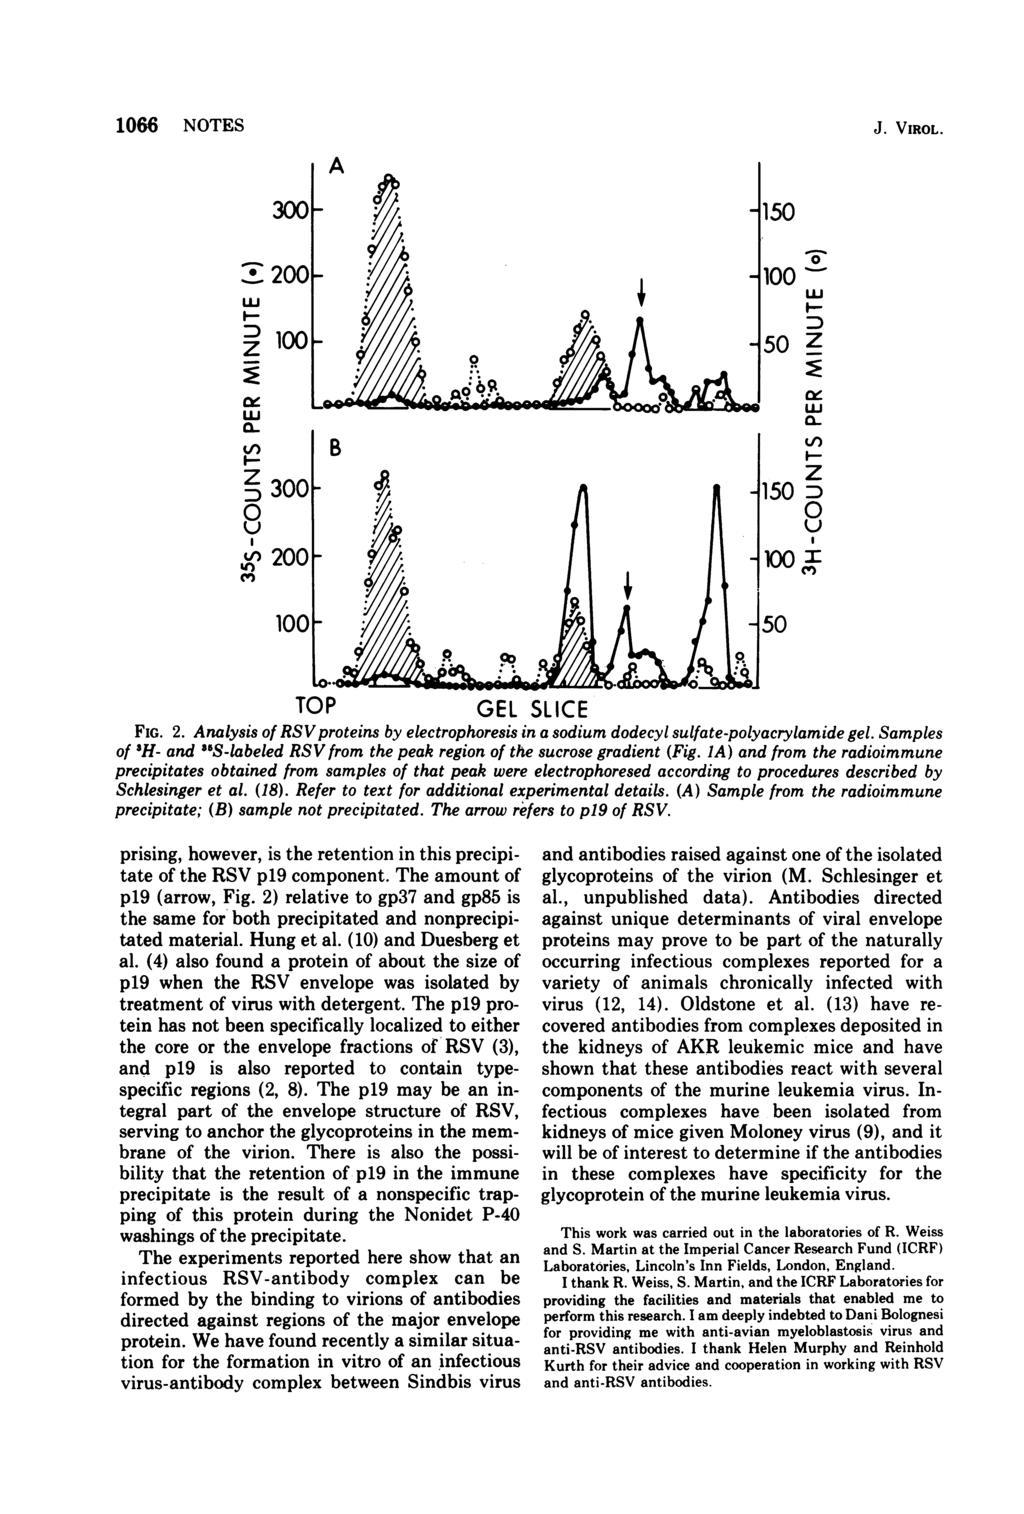 166 NOTES J. VIROL. 2 u z1 1 Lu D.5 Z CL a- Vi) B 'I) z1,.l~~~~~~~p. z.15 zd I- Dn 3 U (VI) 1 TOP GEL SLICE FIG. 2. Analysis of RSV proteins by electrophoresis in a sodium dodecyl sulfate-polyacrylamide gel.